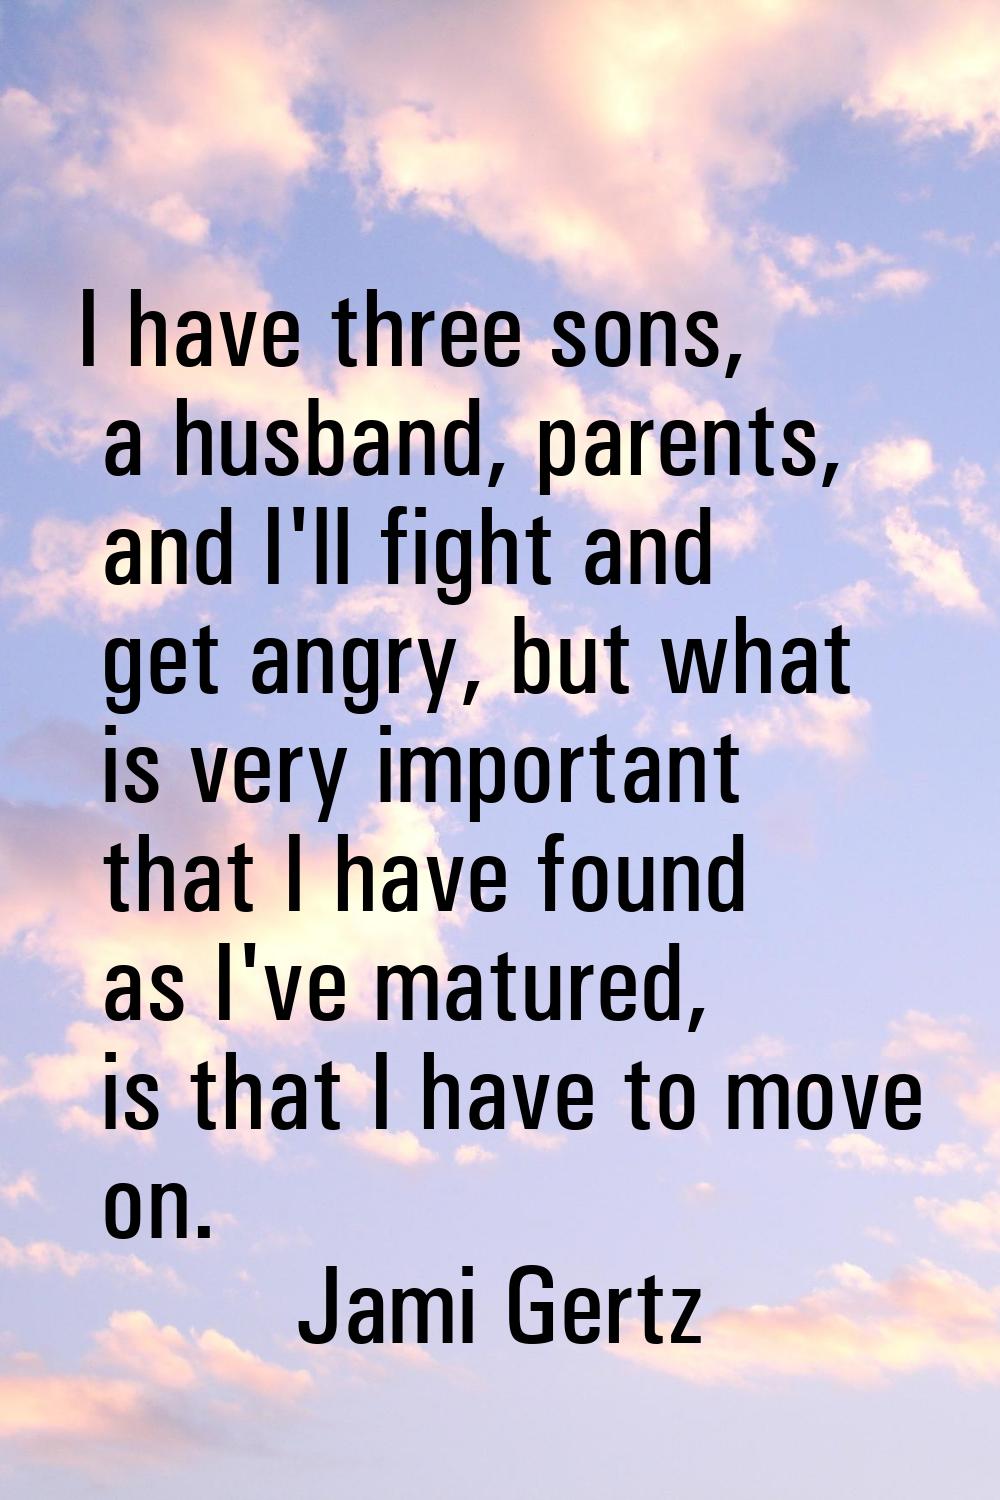 I have three sons, a husband, parents, and I'll fight and get angry, but what is very important tha